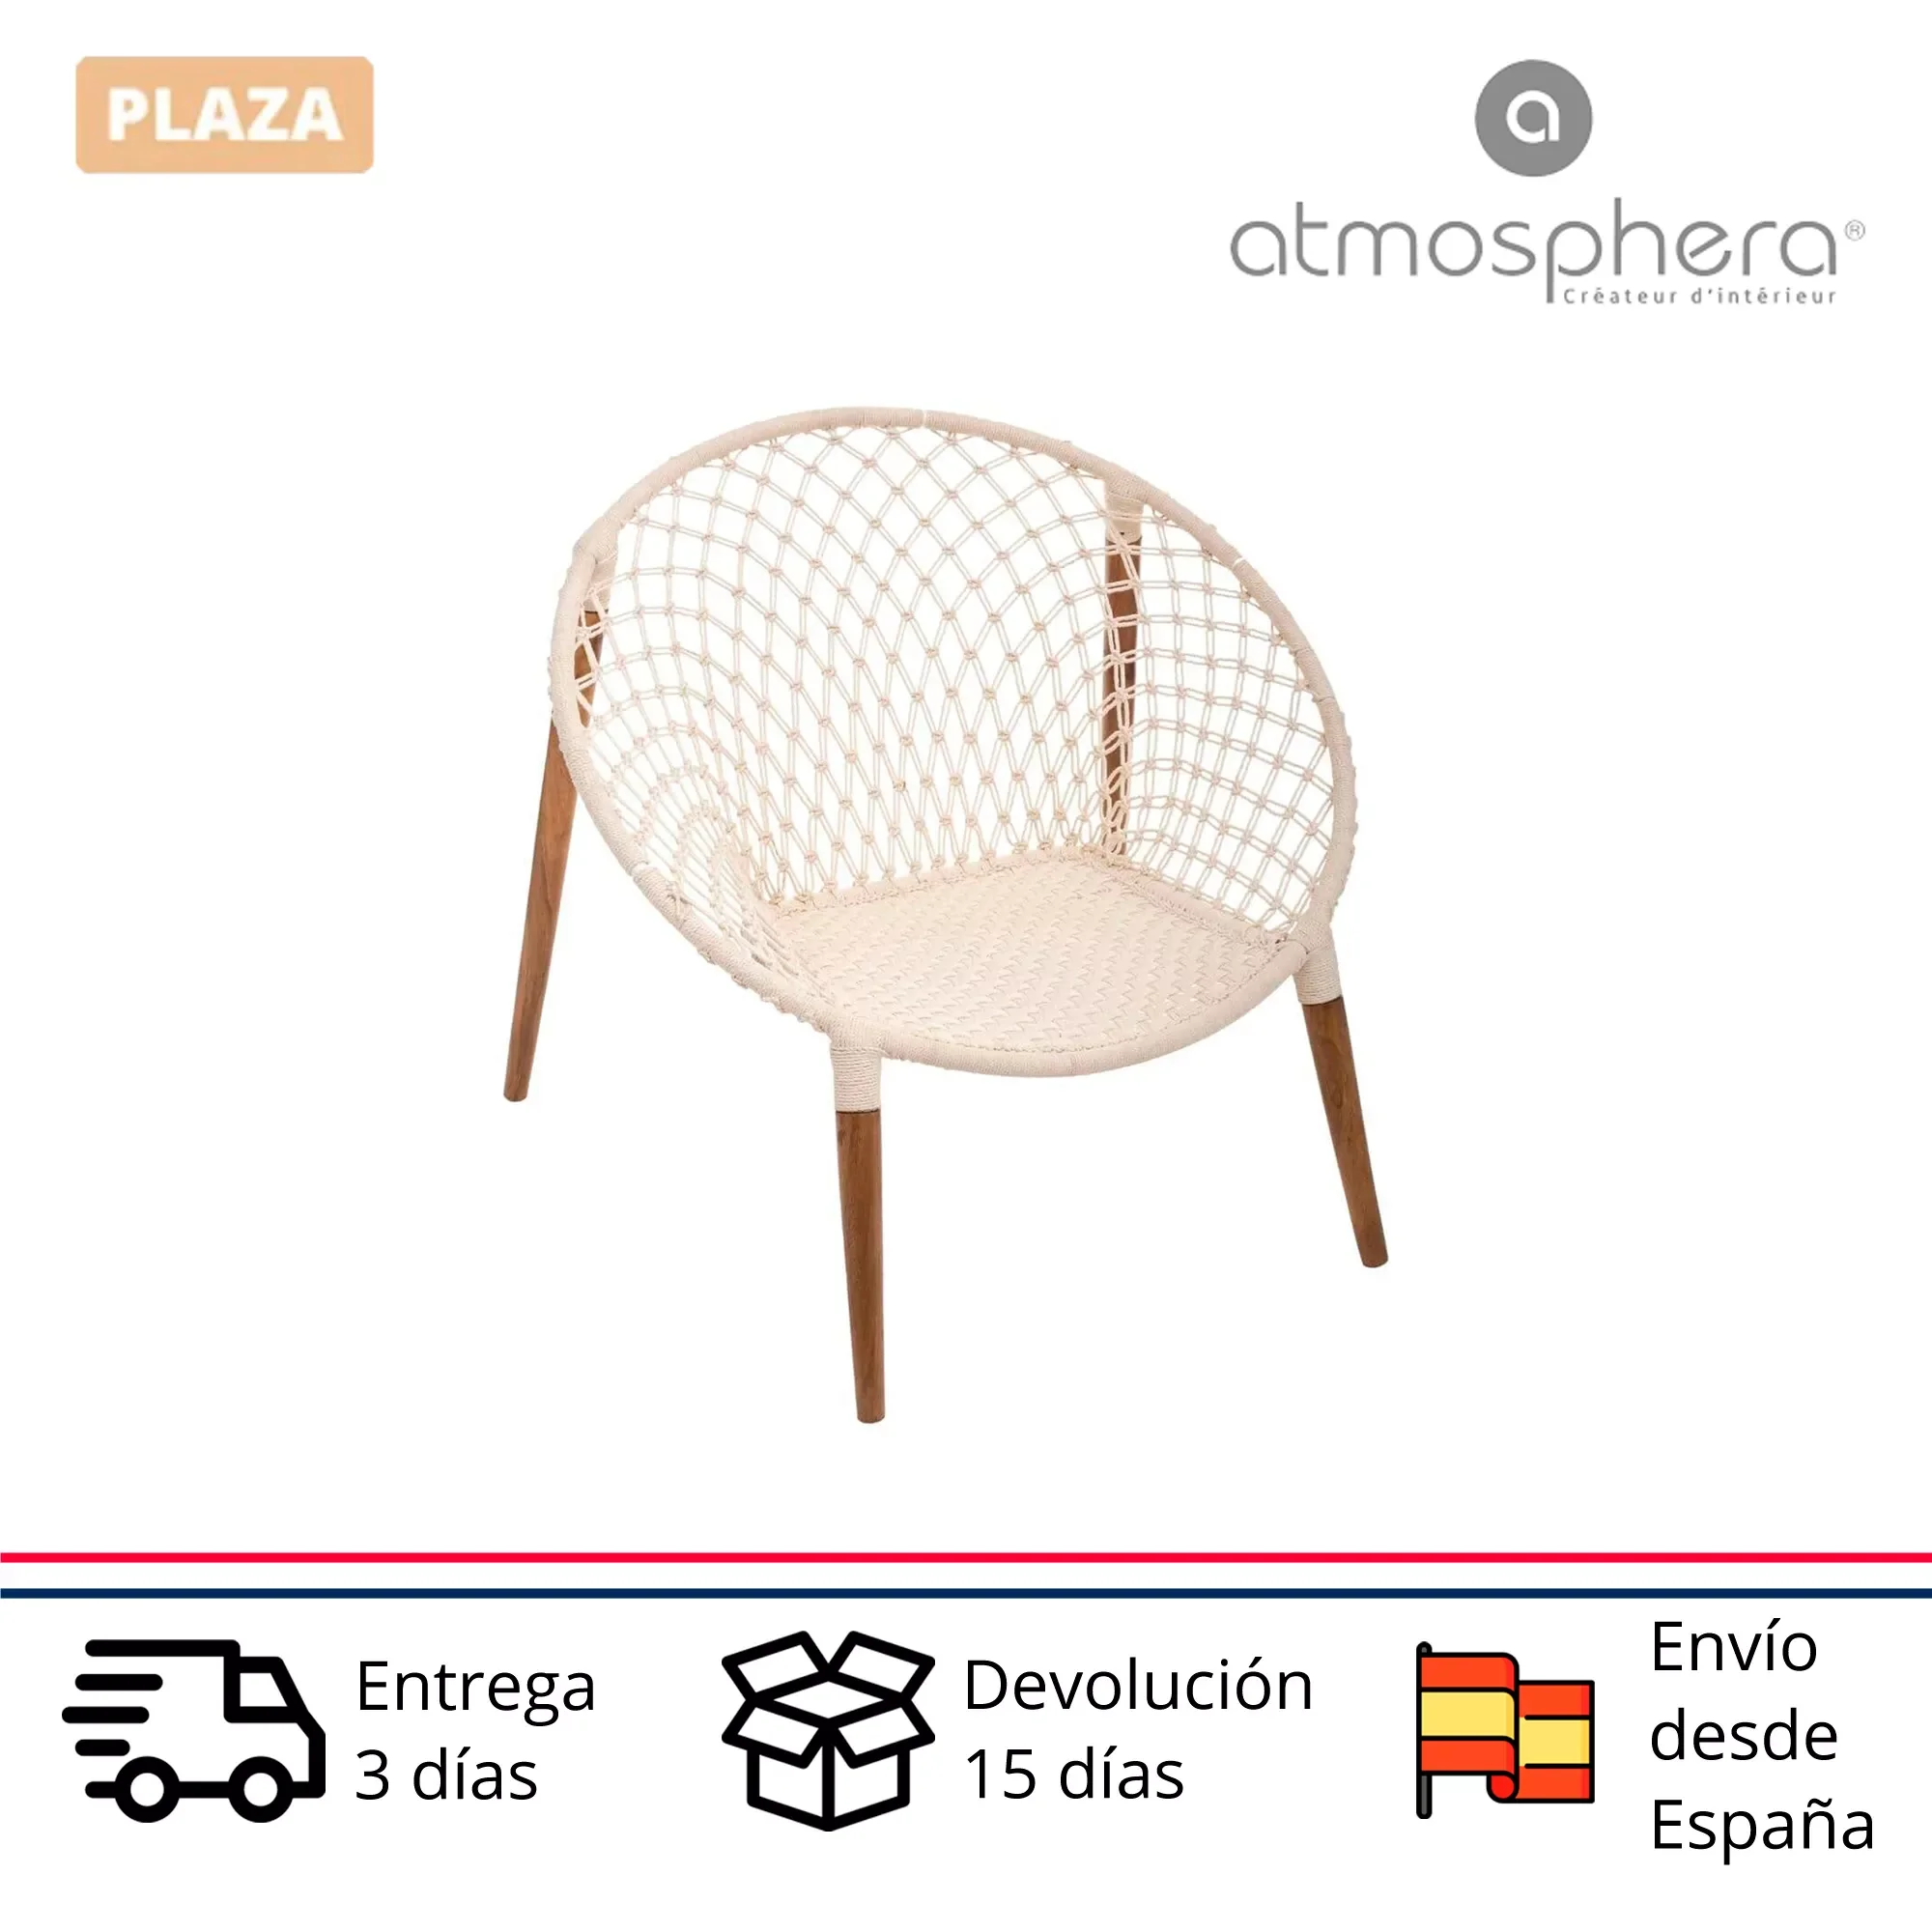 

NEW2023 armchair braided in white with a round Net-shaped made of mango wood and cotton